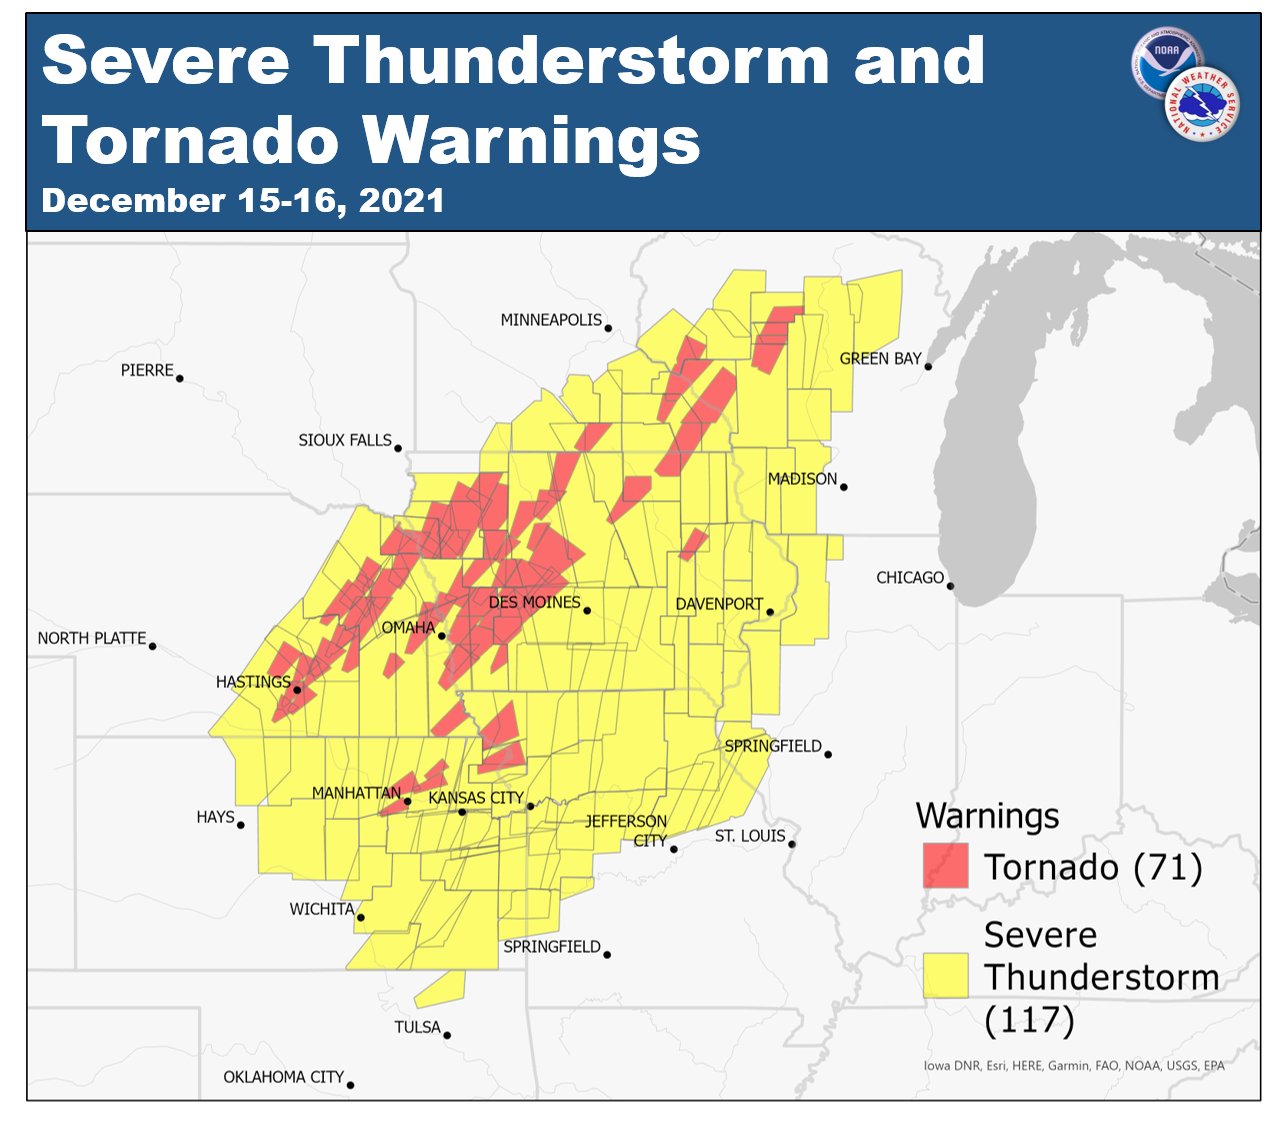 Map of severe thunderstorm and tornado warnings issued across the Midwest on December 15th, 2021.